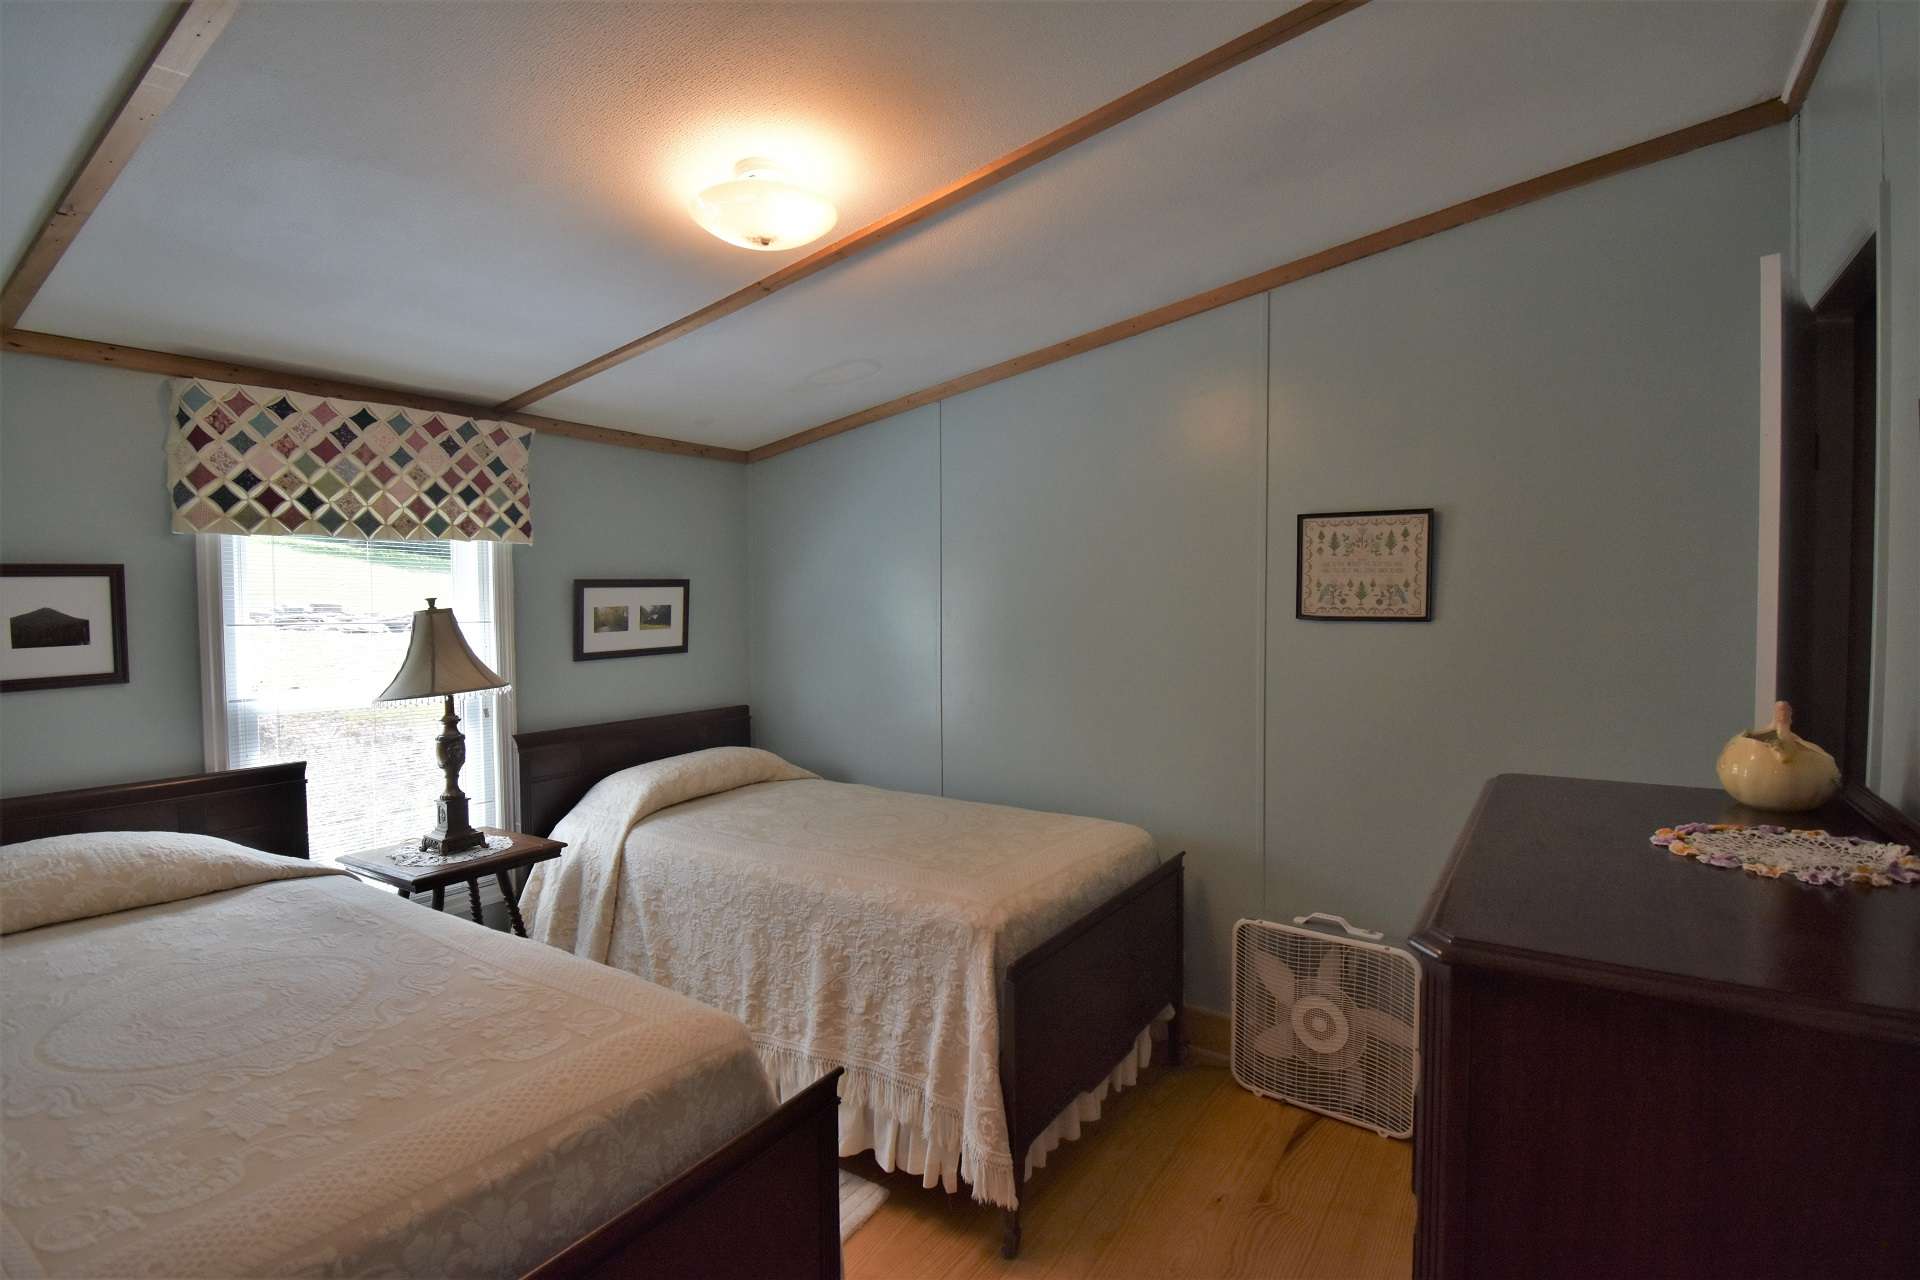 Both guest bedrooms are spacious and light filled, and share a full bath.